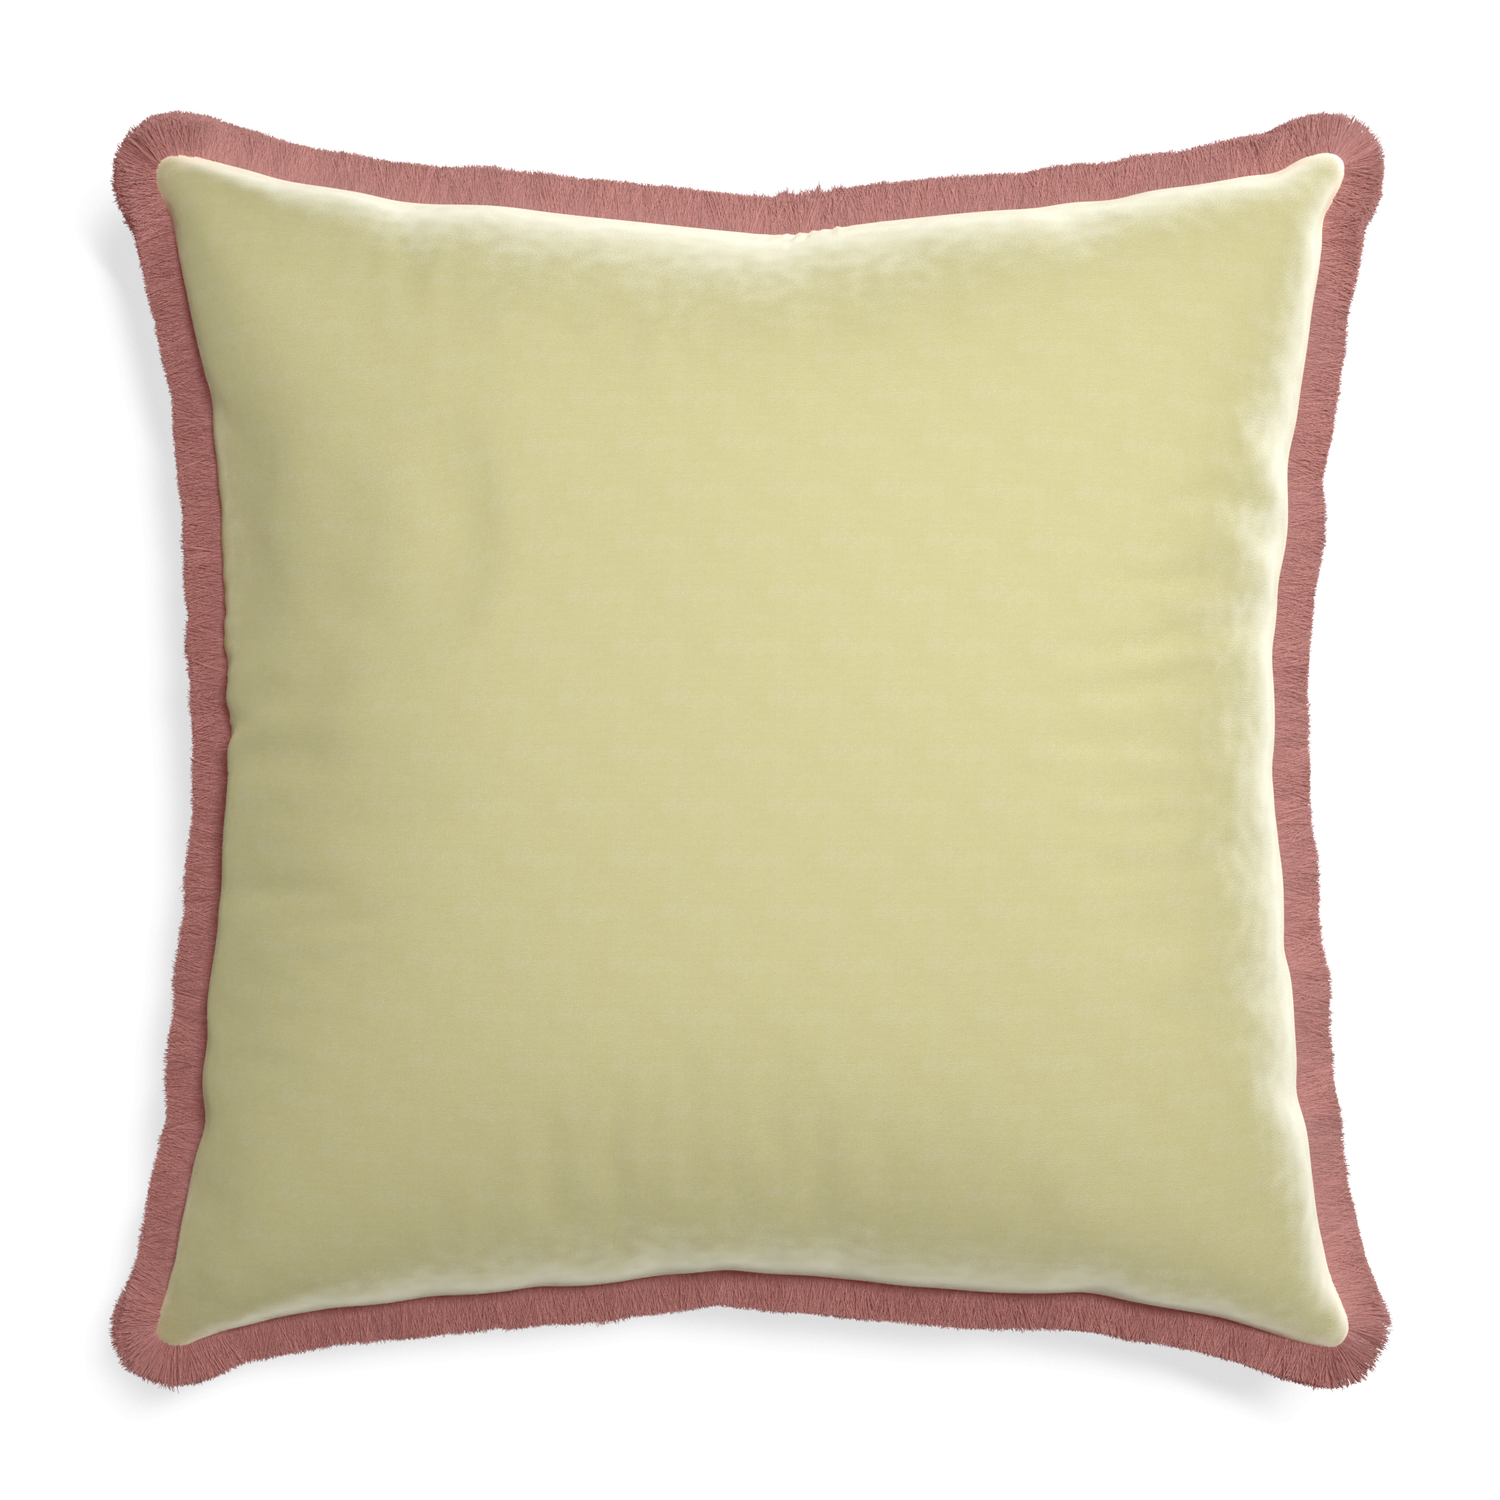 square light green pillow with dusty rose pink fringe